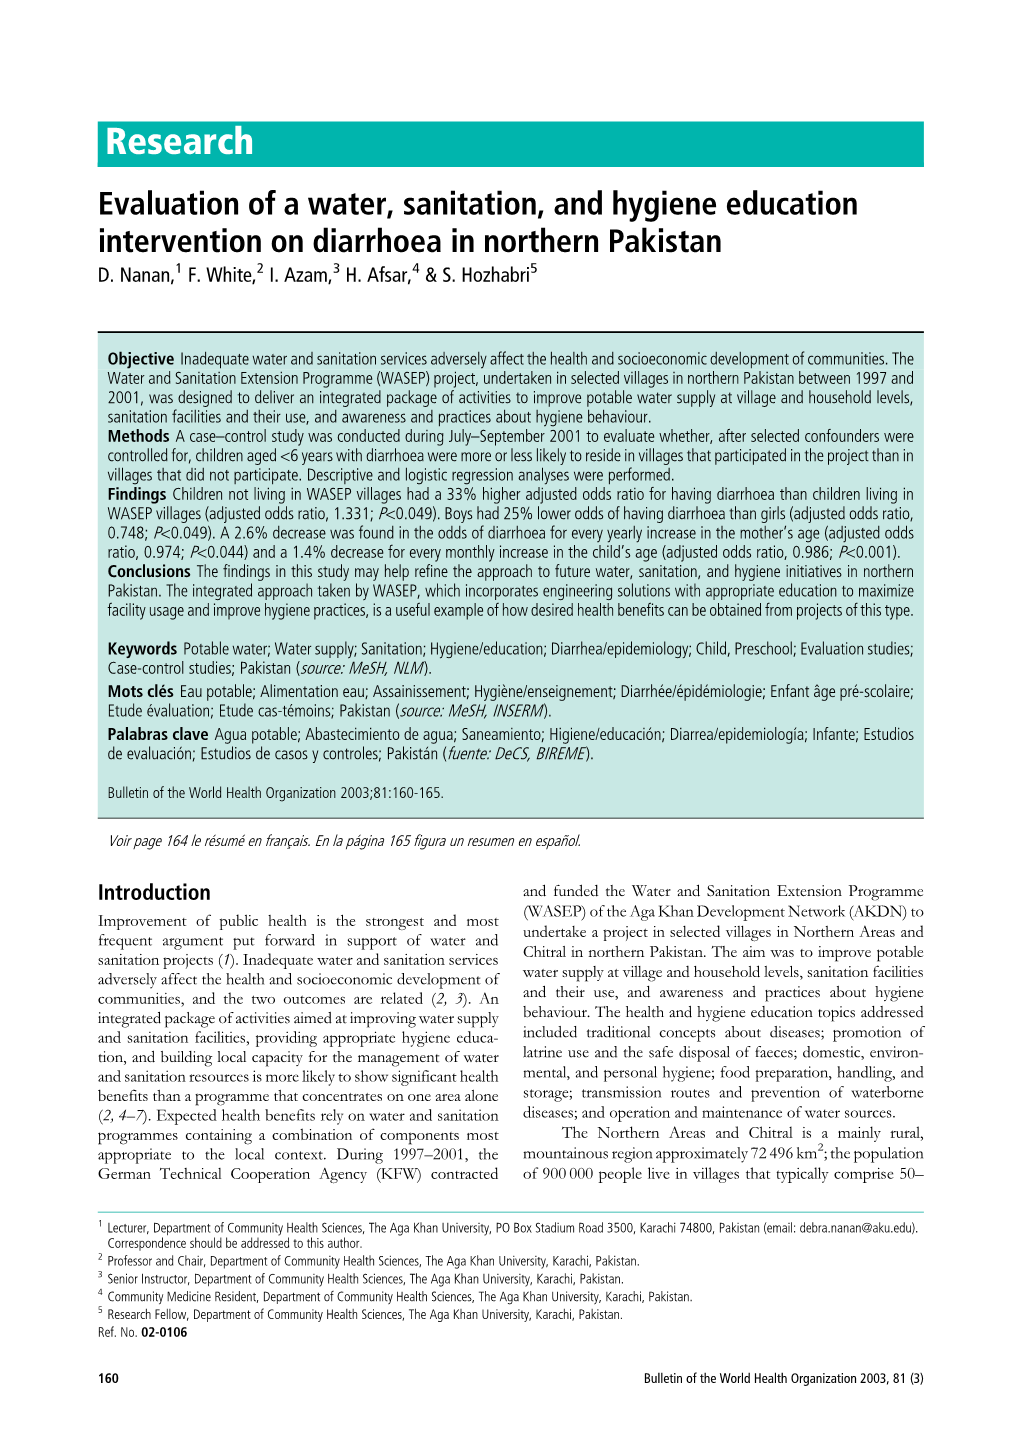 Research Evaluation of a Water, Sanitation, and Hygiene Education Intervention on Diarrhoea in Northern Pakistan D